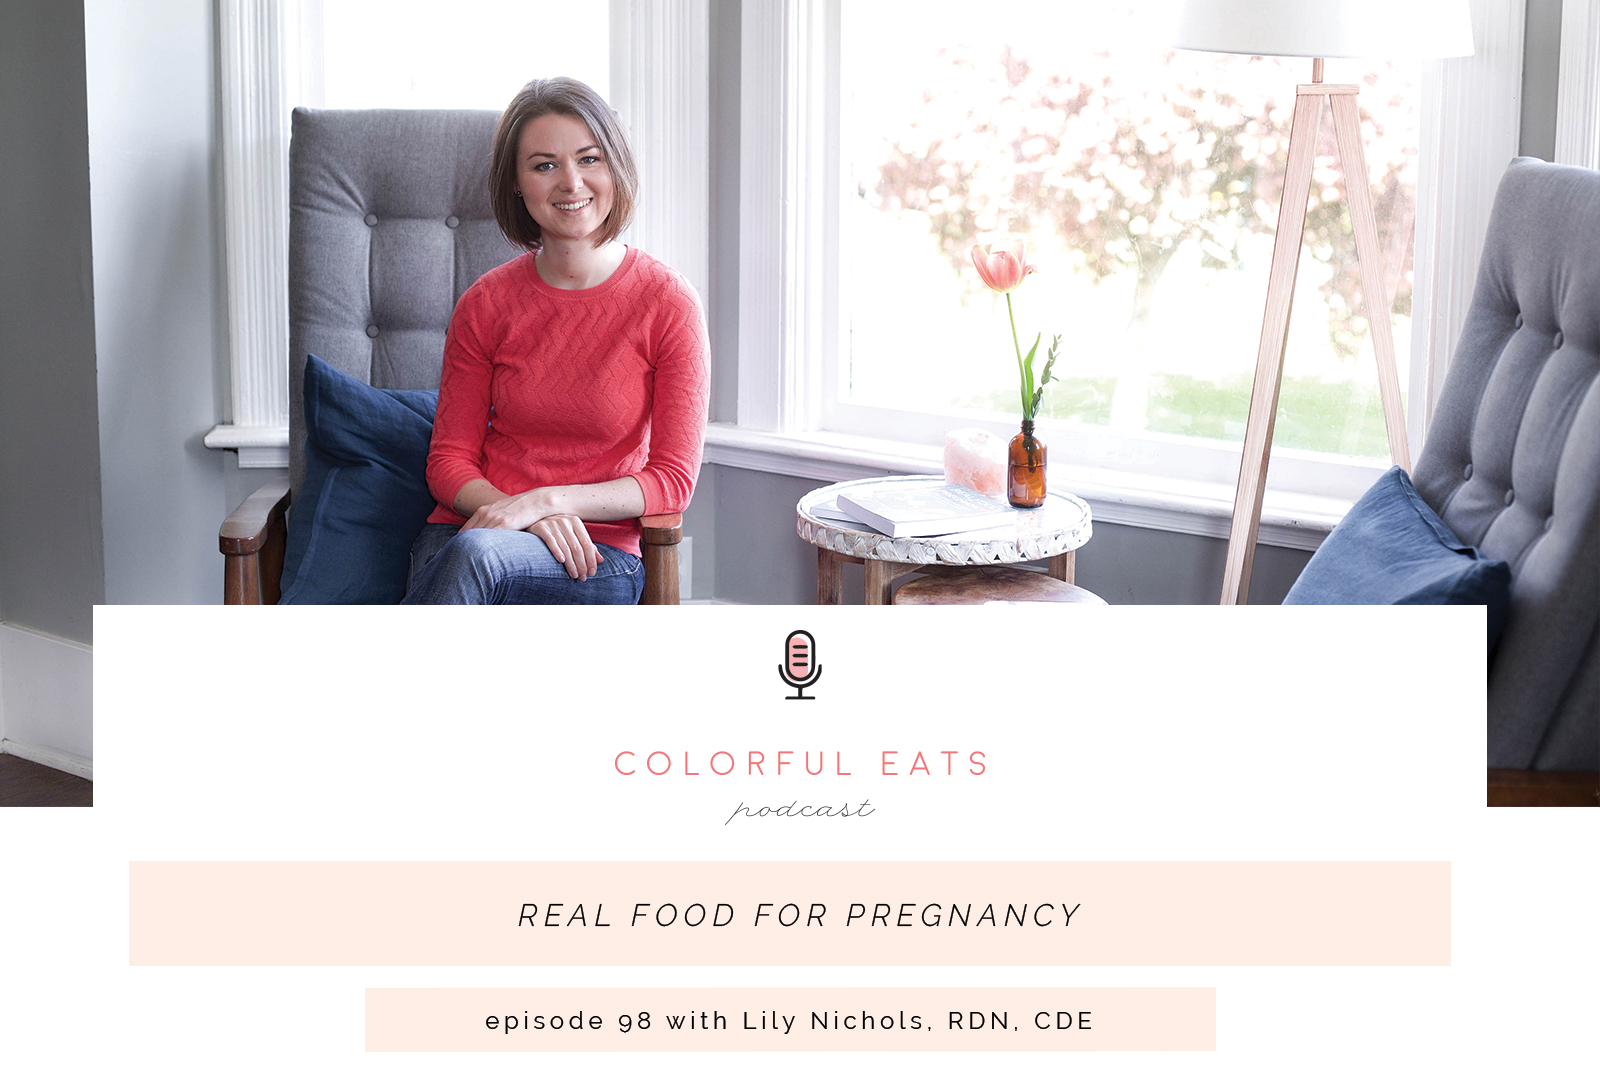 Episode 98: Real Food for Pregnancy with Lily Nichols, RDN, CDE